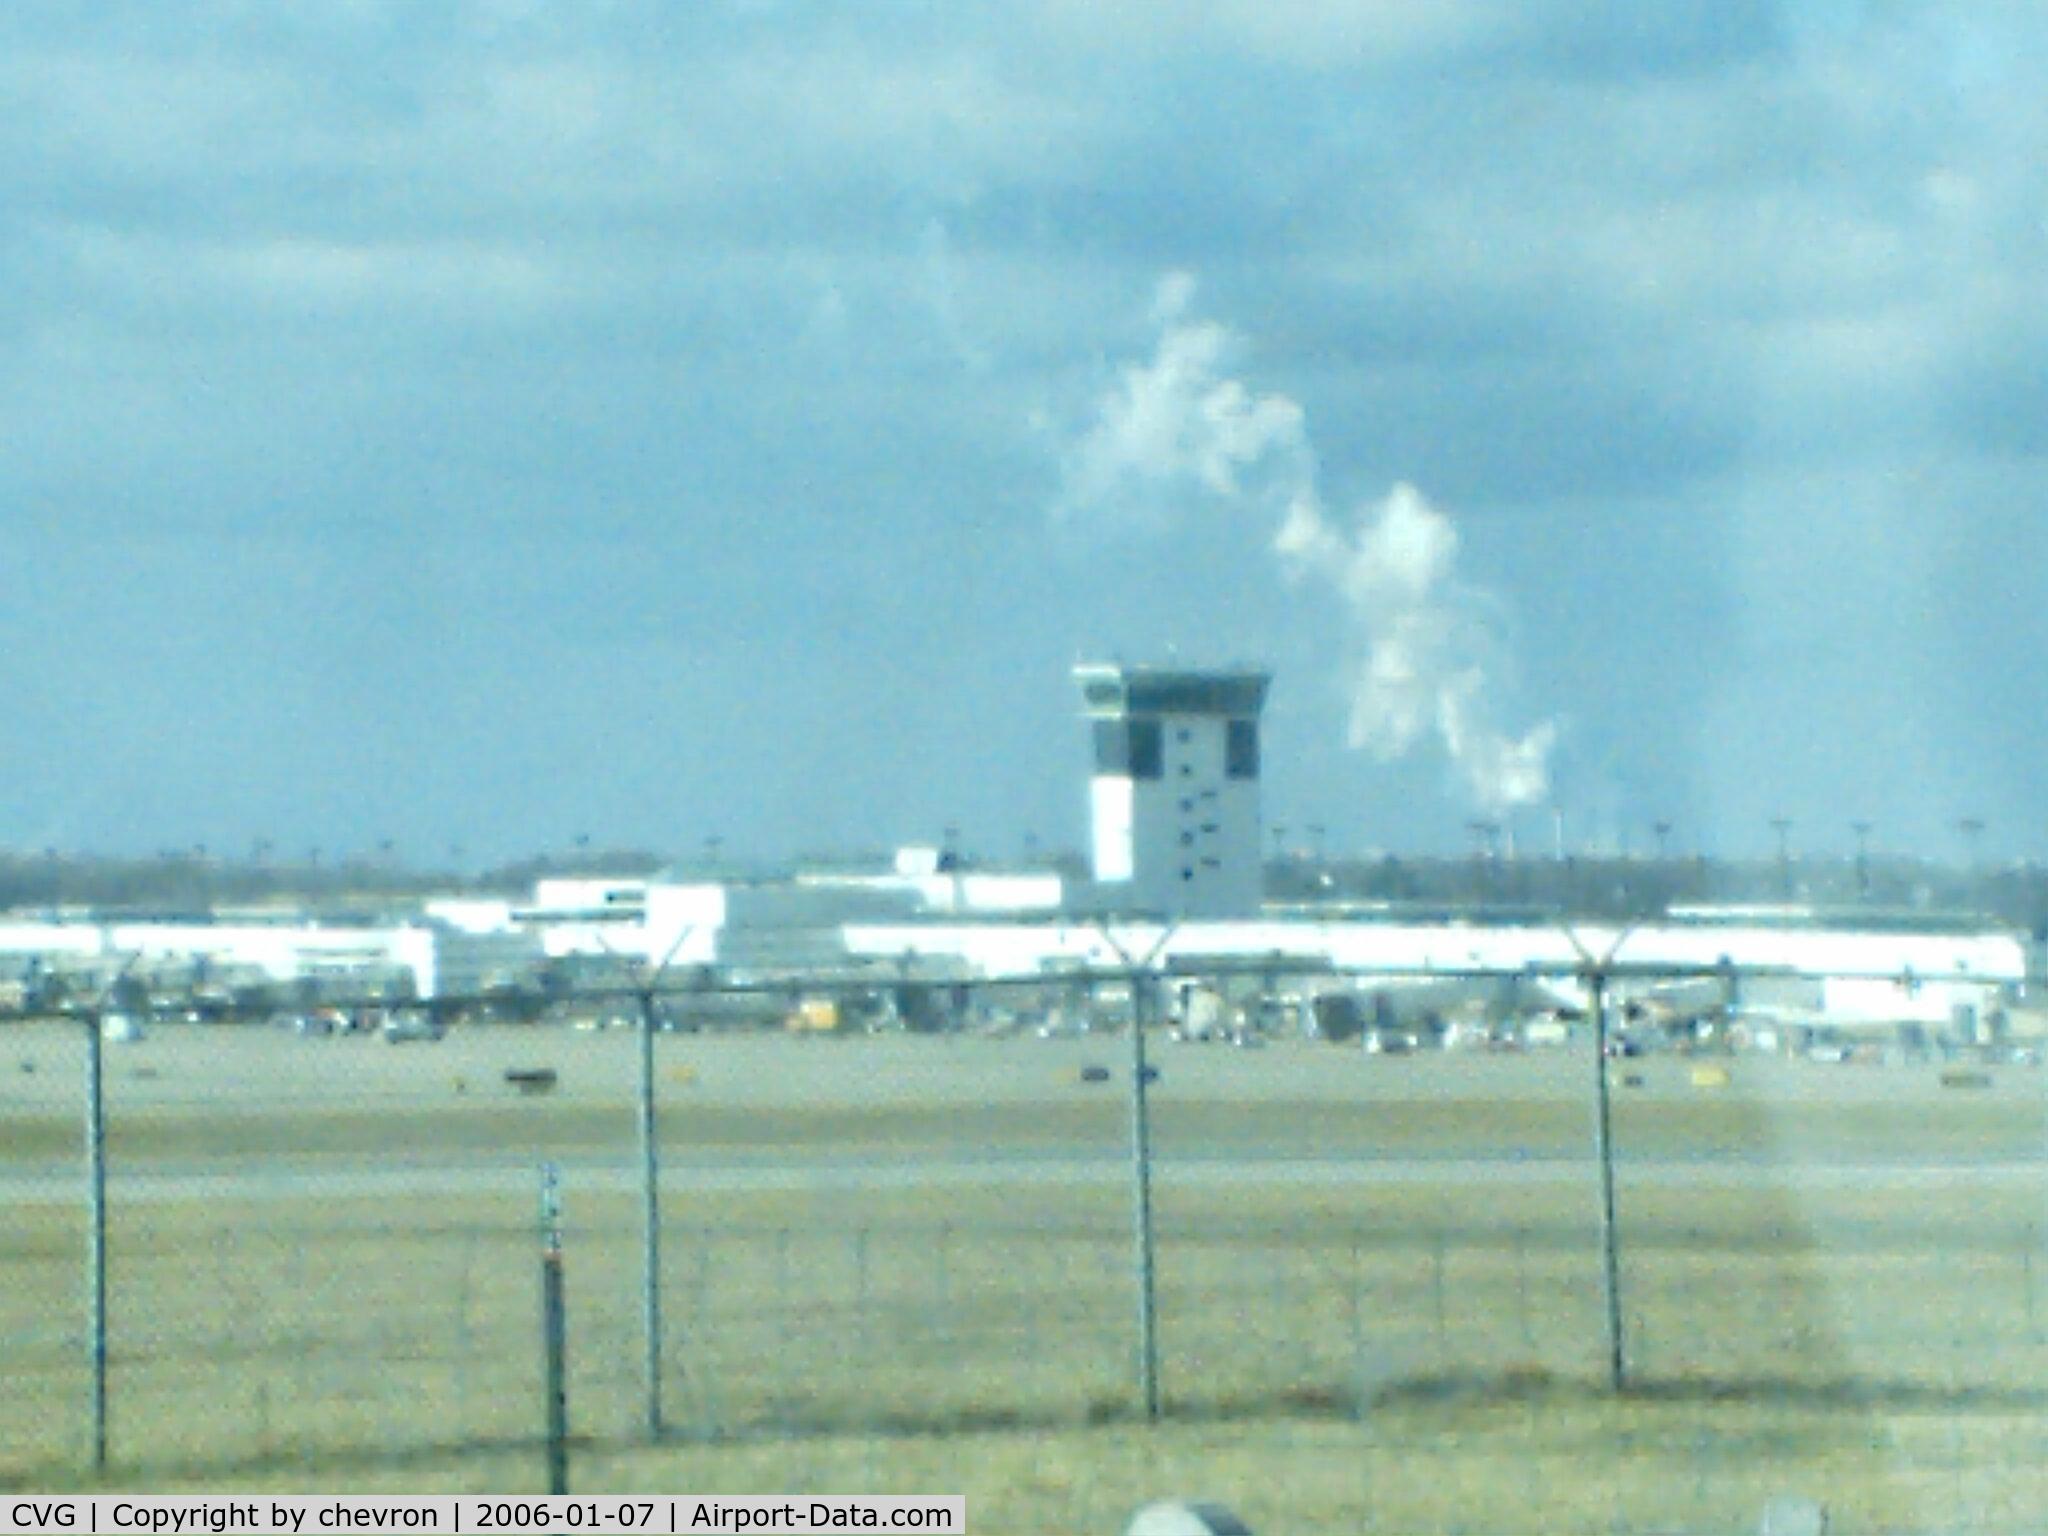 Cincinnati/northern Kentucky International Airport (CVG) - pic taken from viewing area at CVG, smoke in the background is from a power plant , 